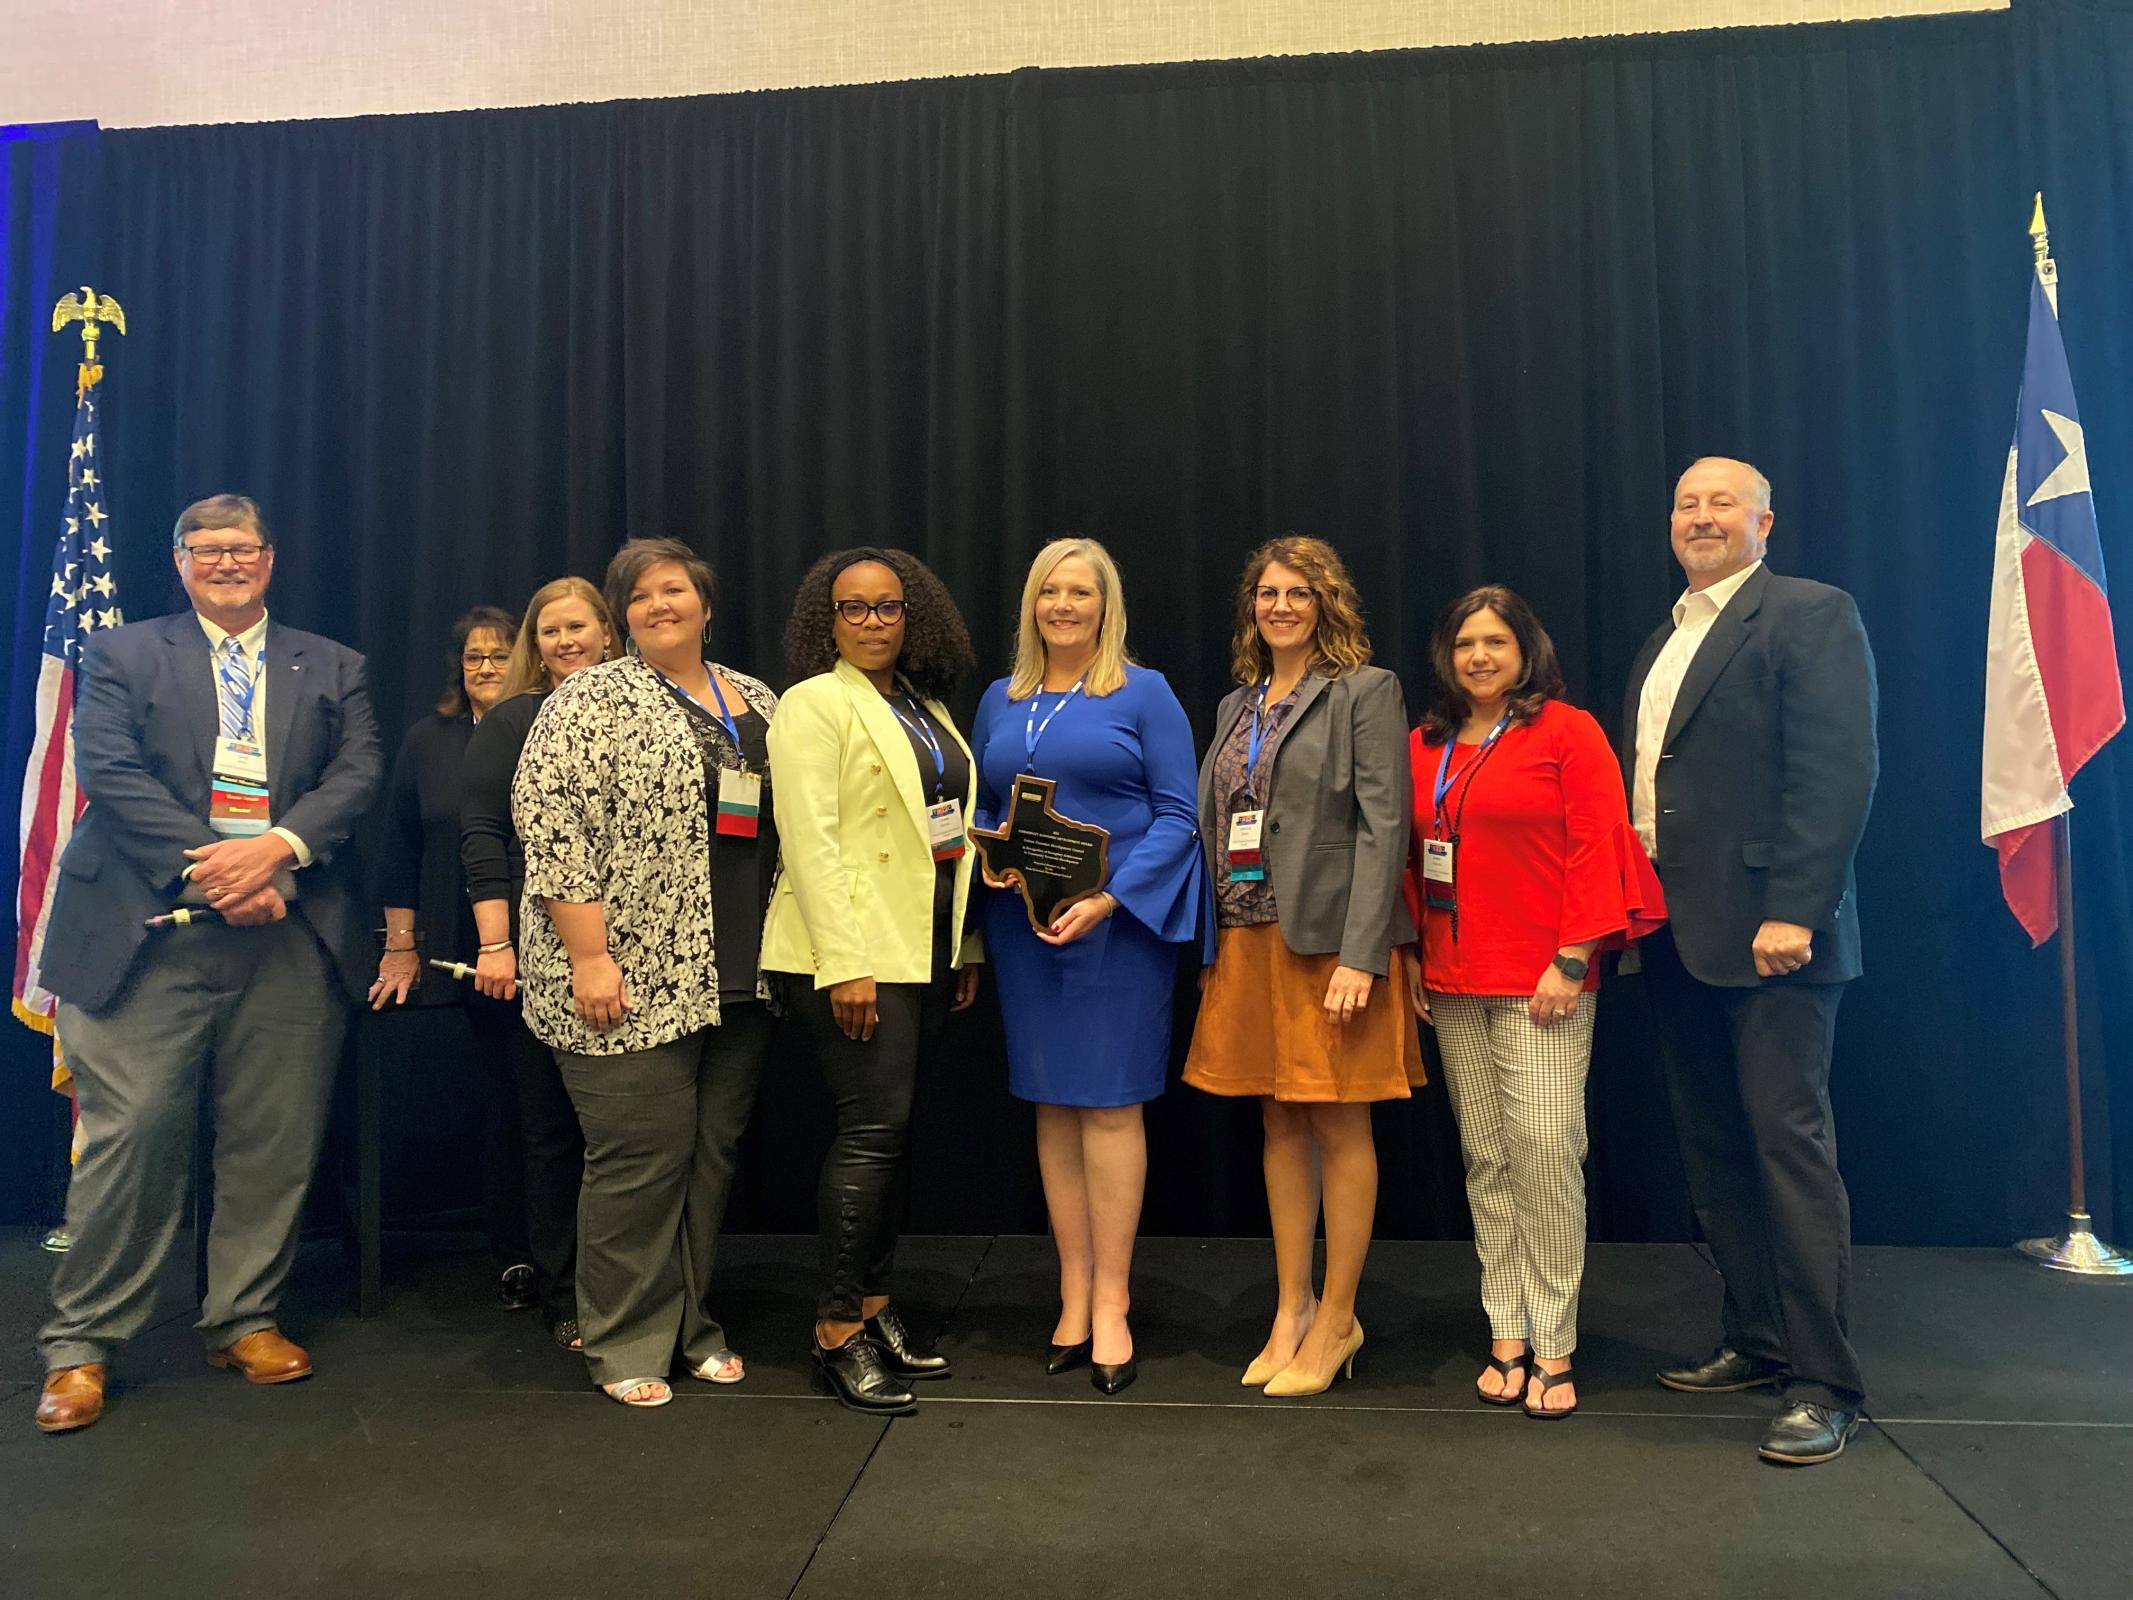 Conroe EDC, City of Conroe, Trammell Crow Company, and The Home Depot Partner to Win Community Economic Development Awards Photo